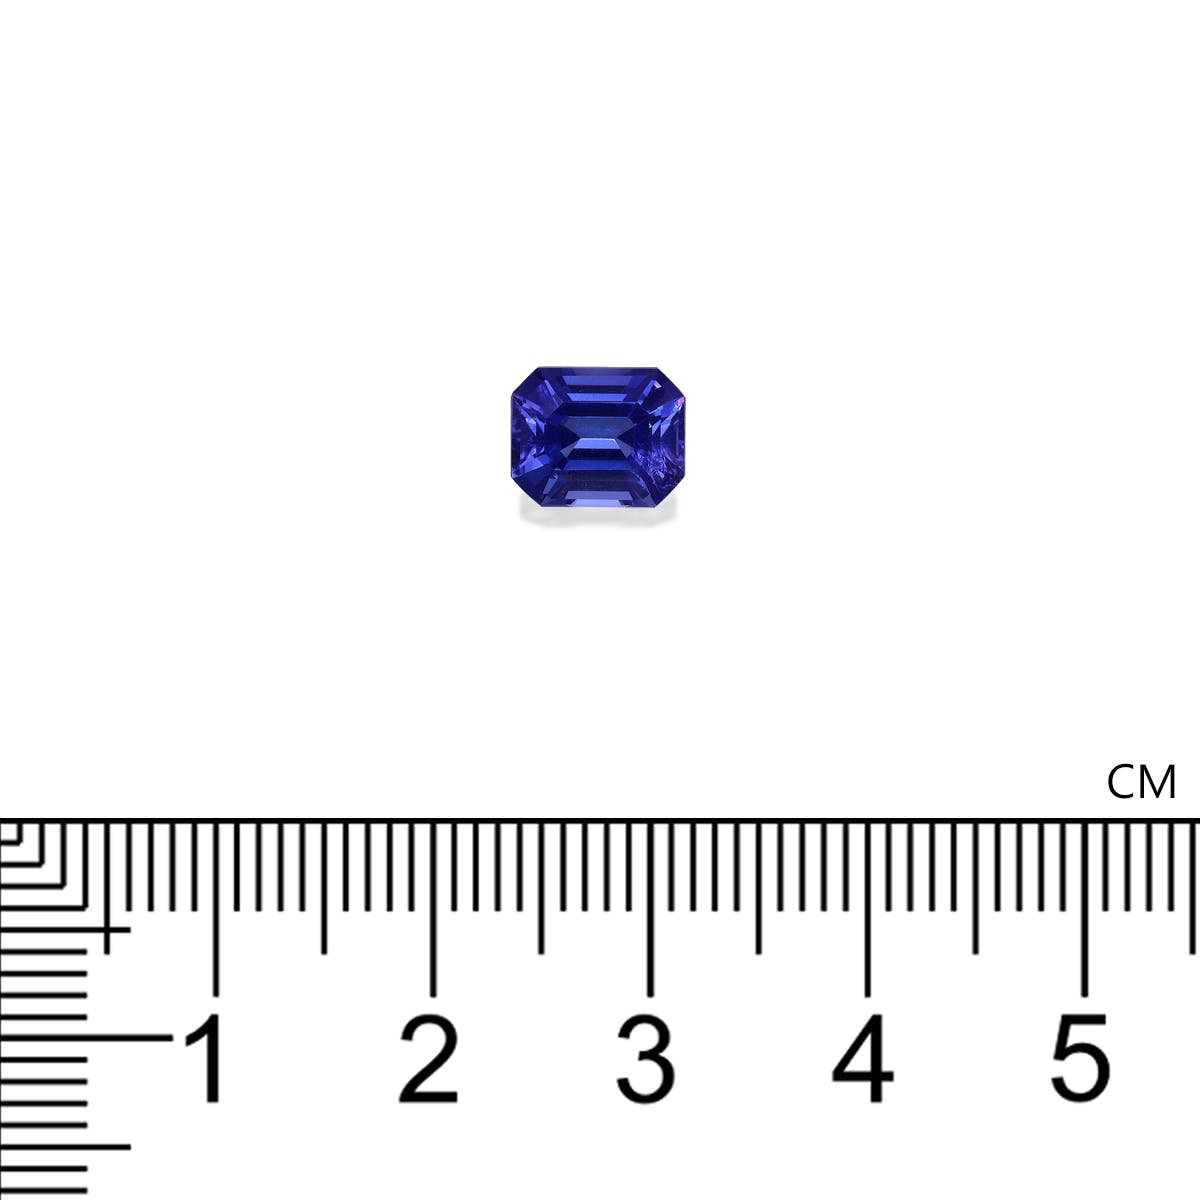 Picture of AAA+ Violet Blue Tanzanite 2.27ct - 8x6mm (TN0568)